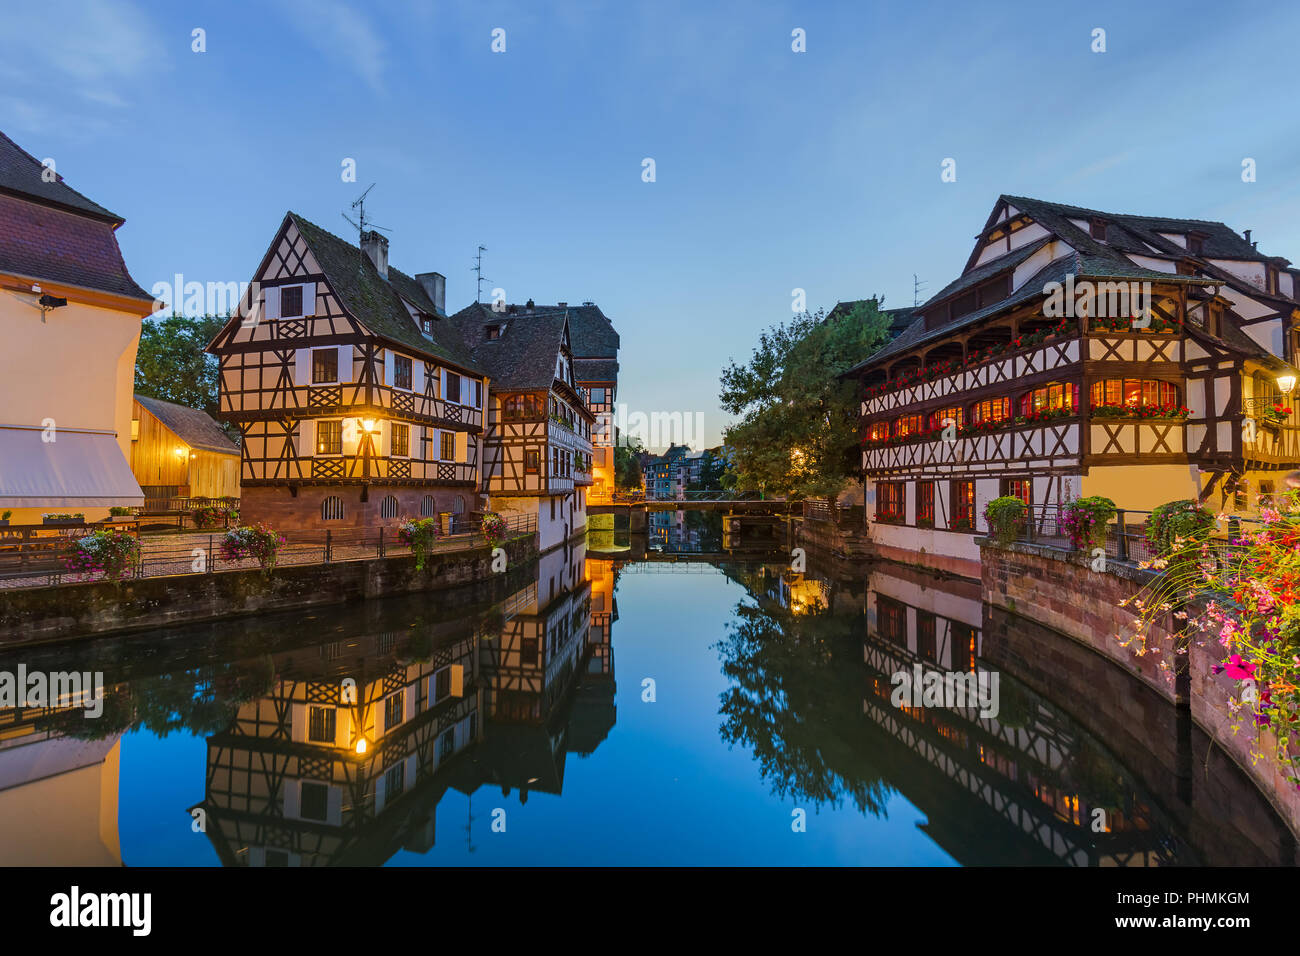 Traditional colorful houses in Strasbourg - Alsace France Stock Photo